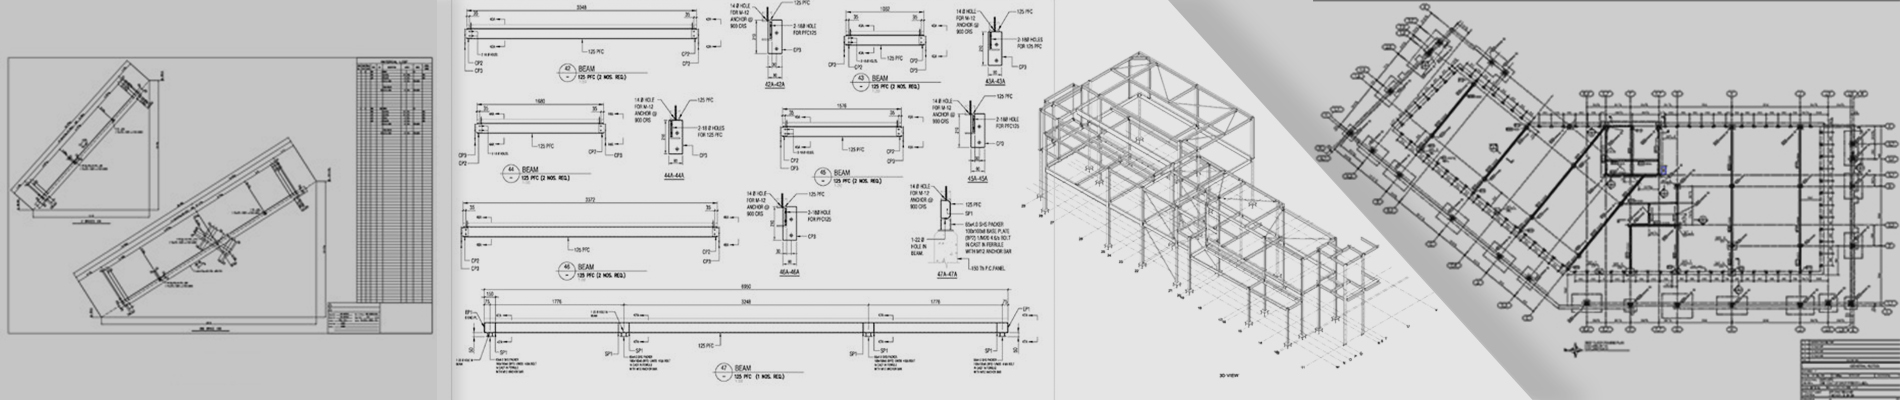 Fabrication Shop Drawing for an Adolescent Hospice Project in Australia